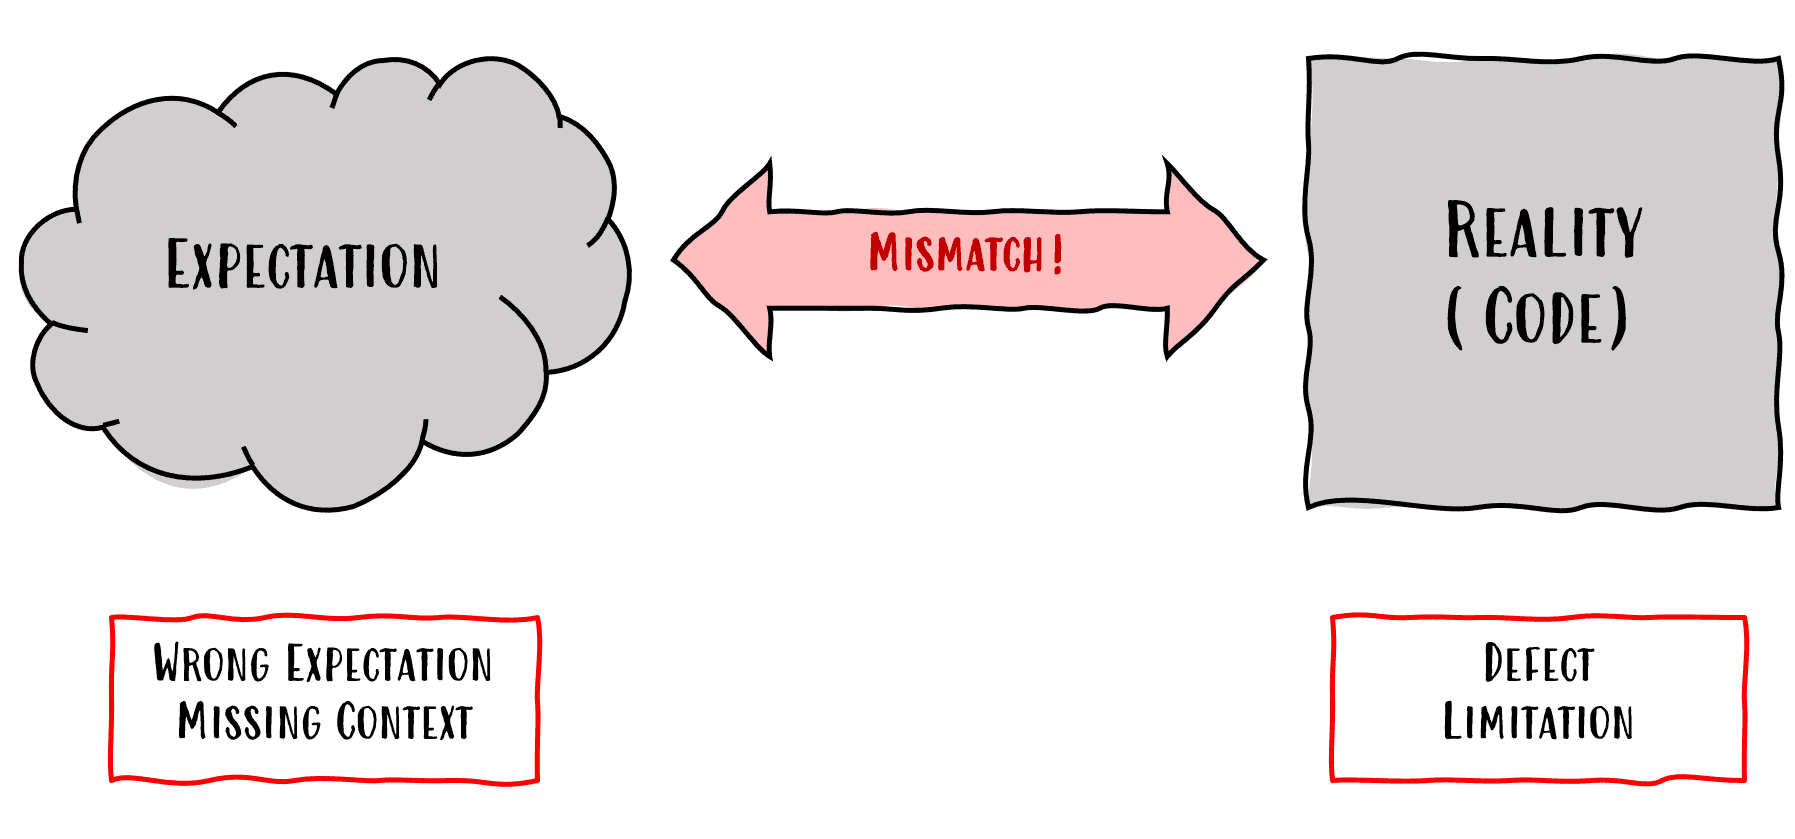 Image showing Expectation <mismatch!> Reality (code) Wrong expectation missing context. Defect limitation